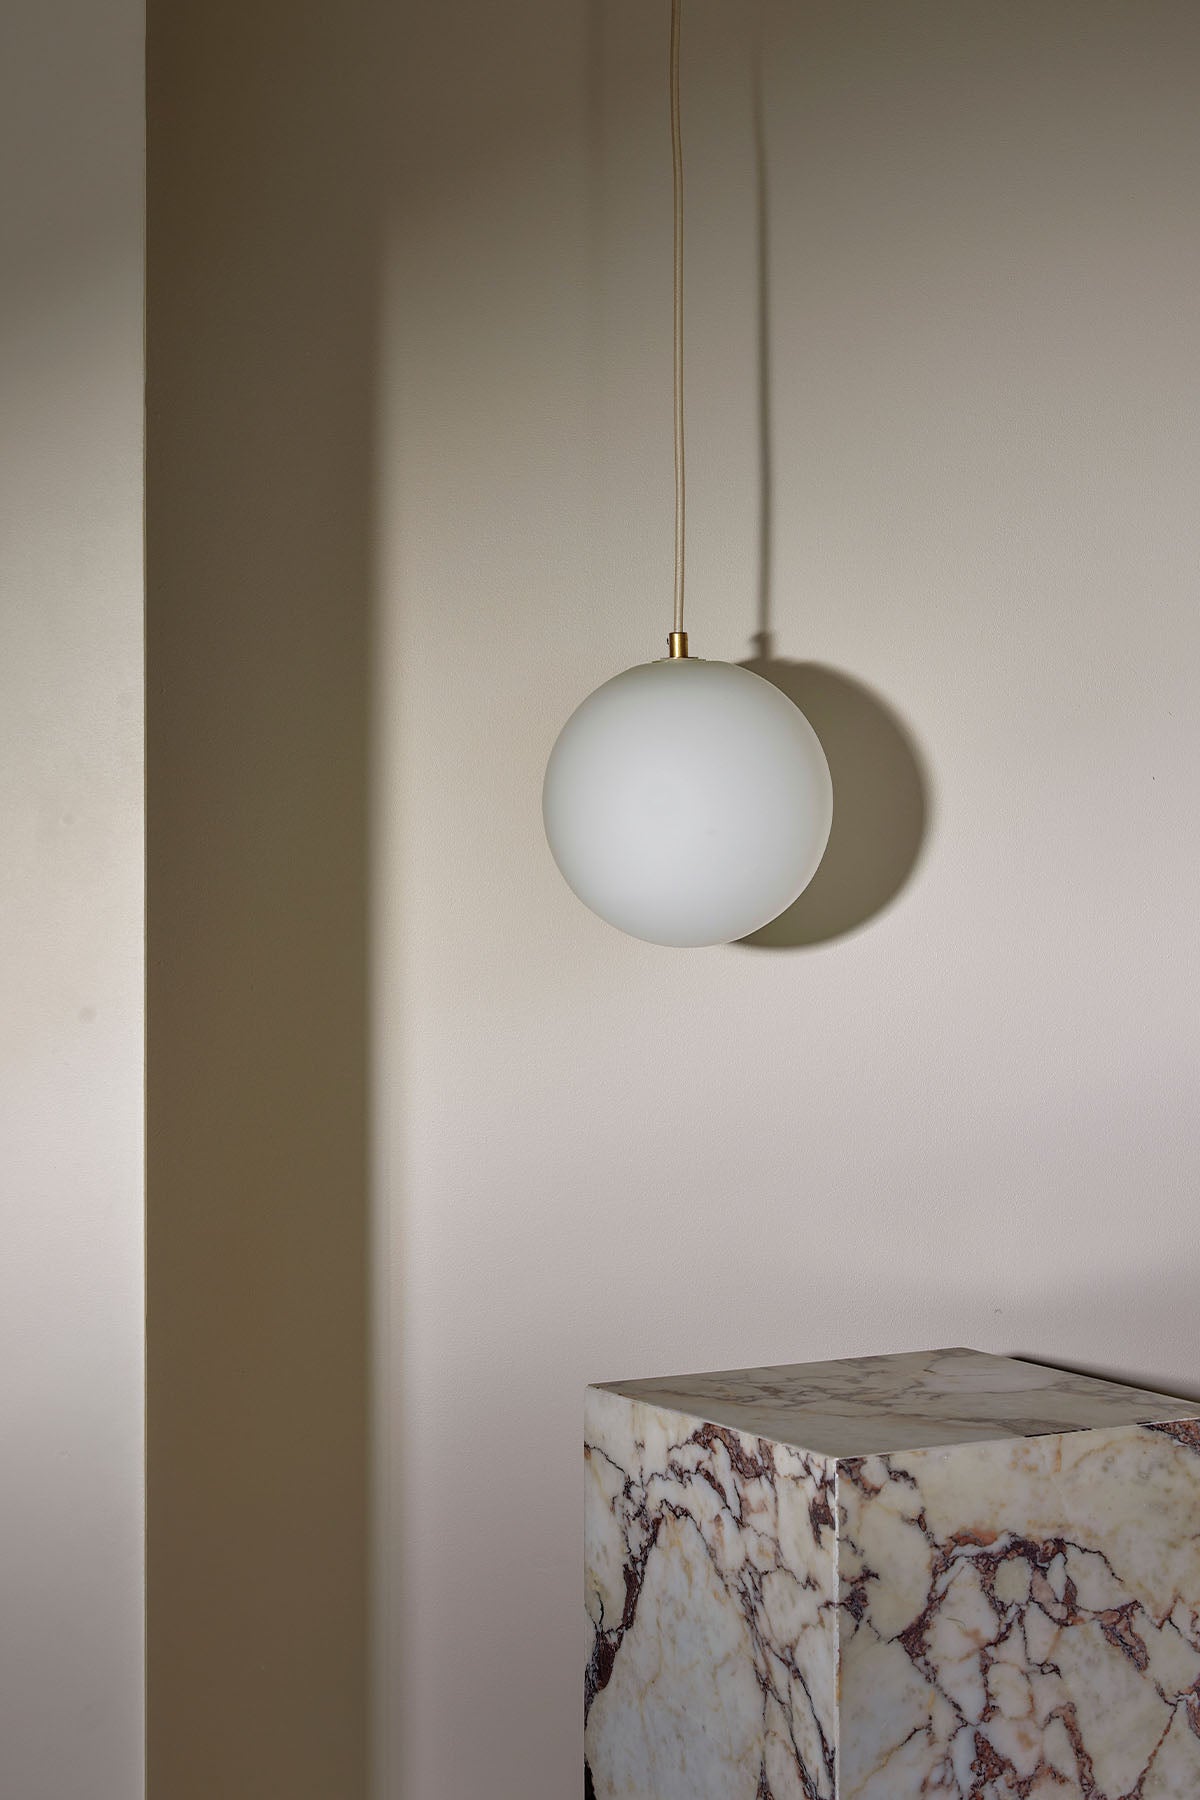 Orb Pendant, Large in Brass and White Frosted. Image by Lawrence Furzey